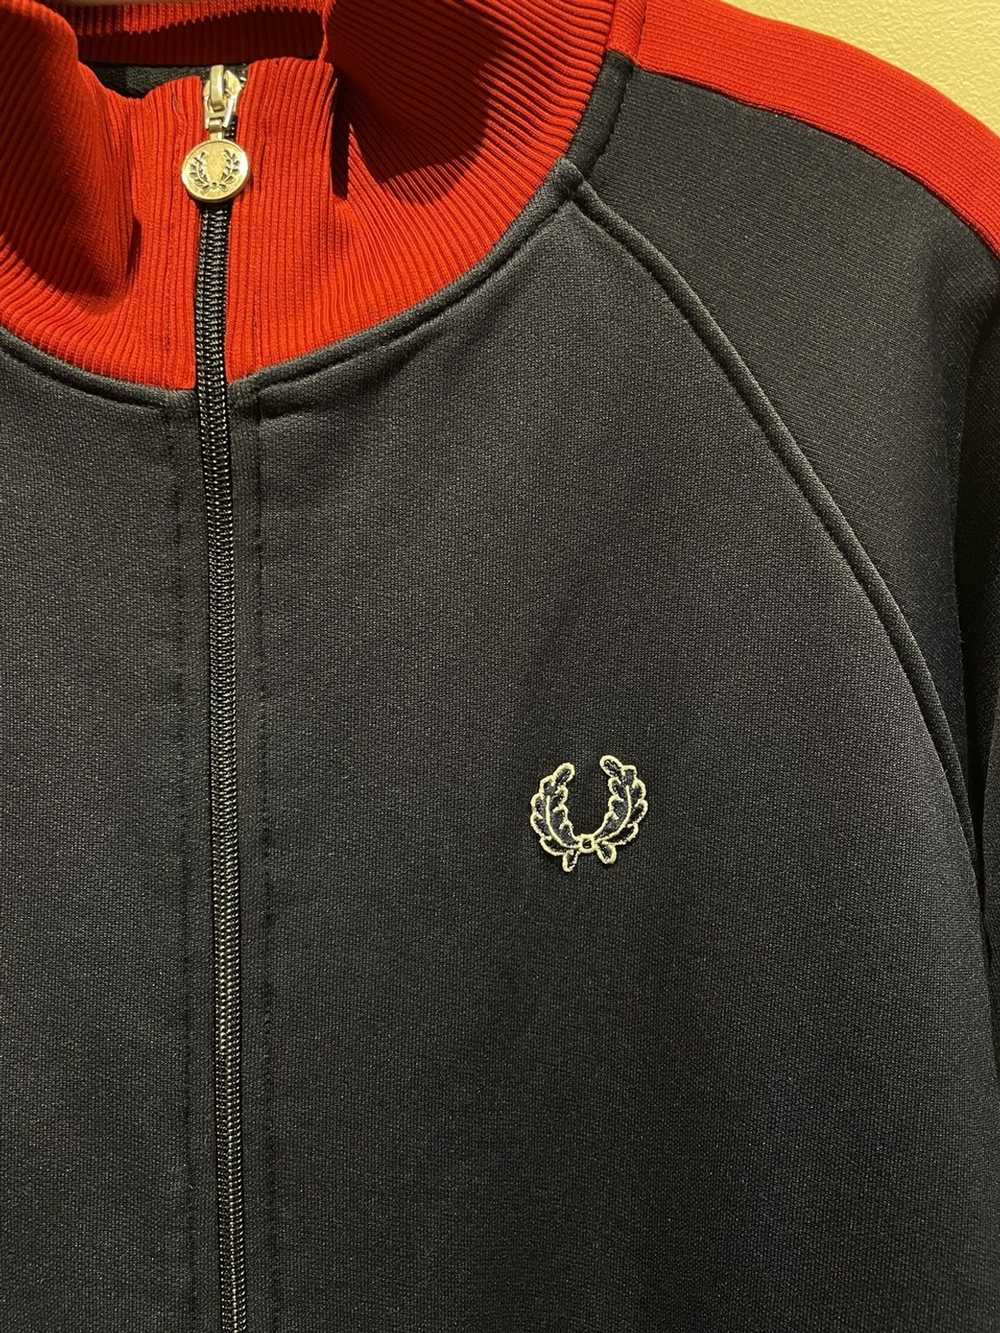 Fred Perry Fred Perry vintage Full Zip - image 4